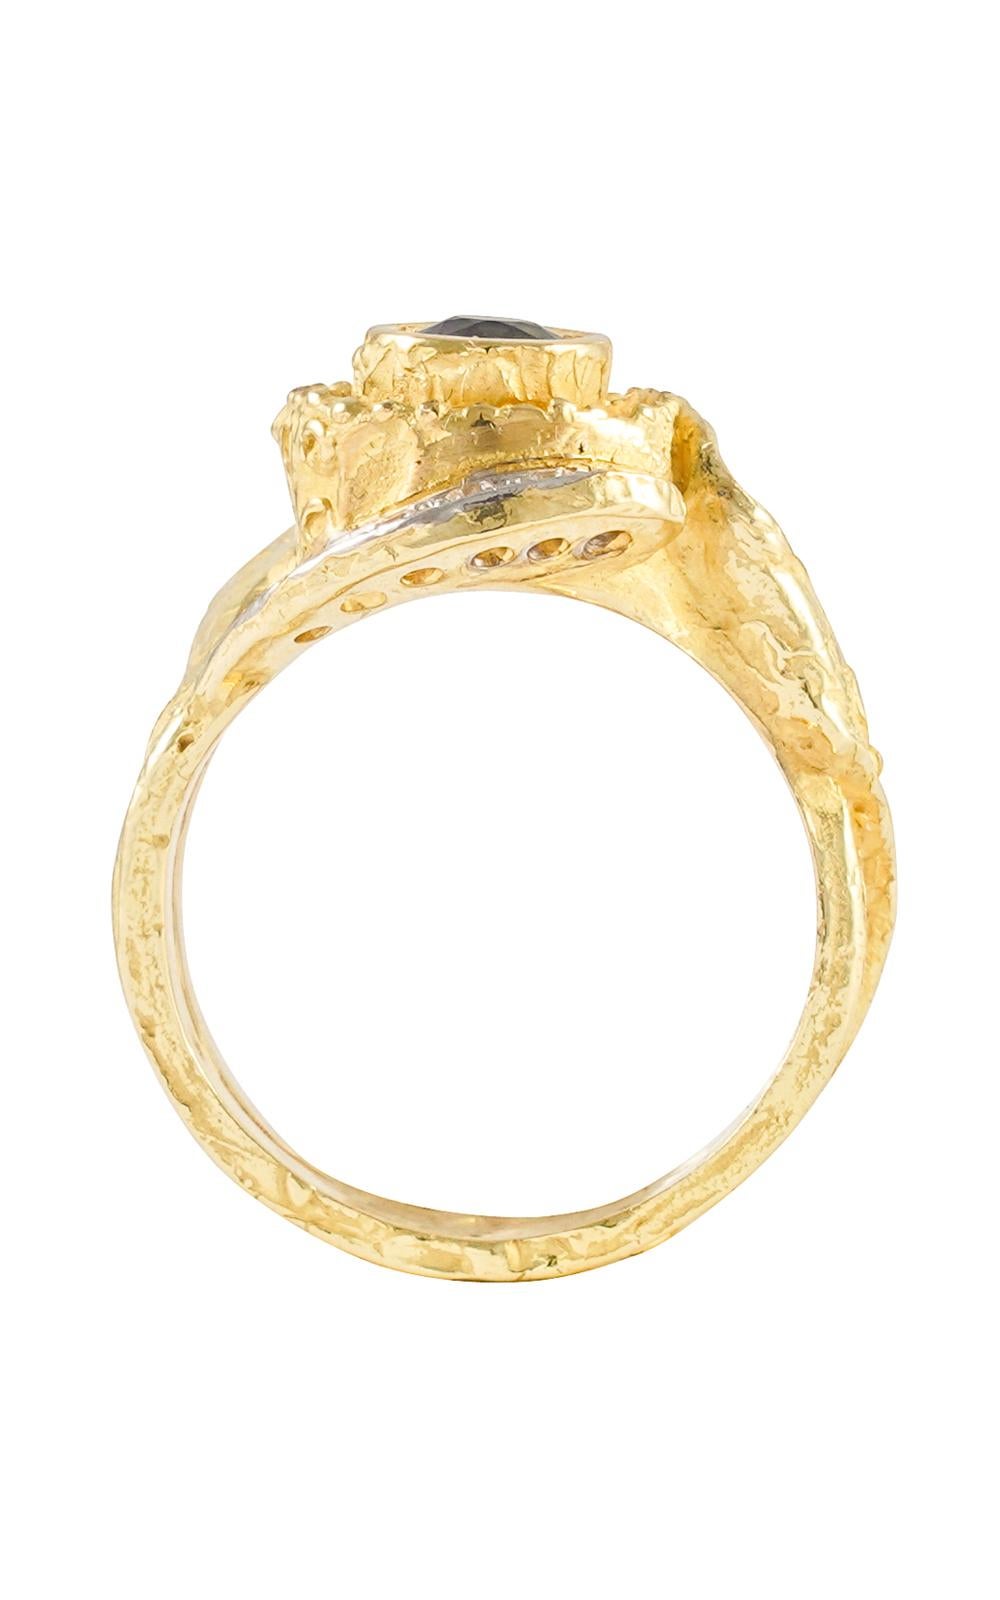 Round Cut Sacchi Sapphire and Diamonds Gemstone Cocktail Ring 18 Karat Yellow Gold For Sale